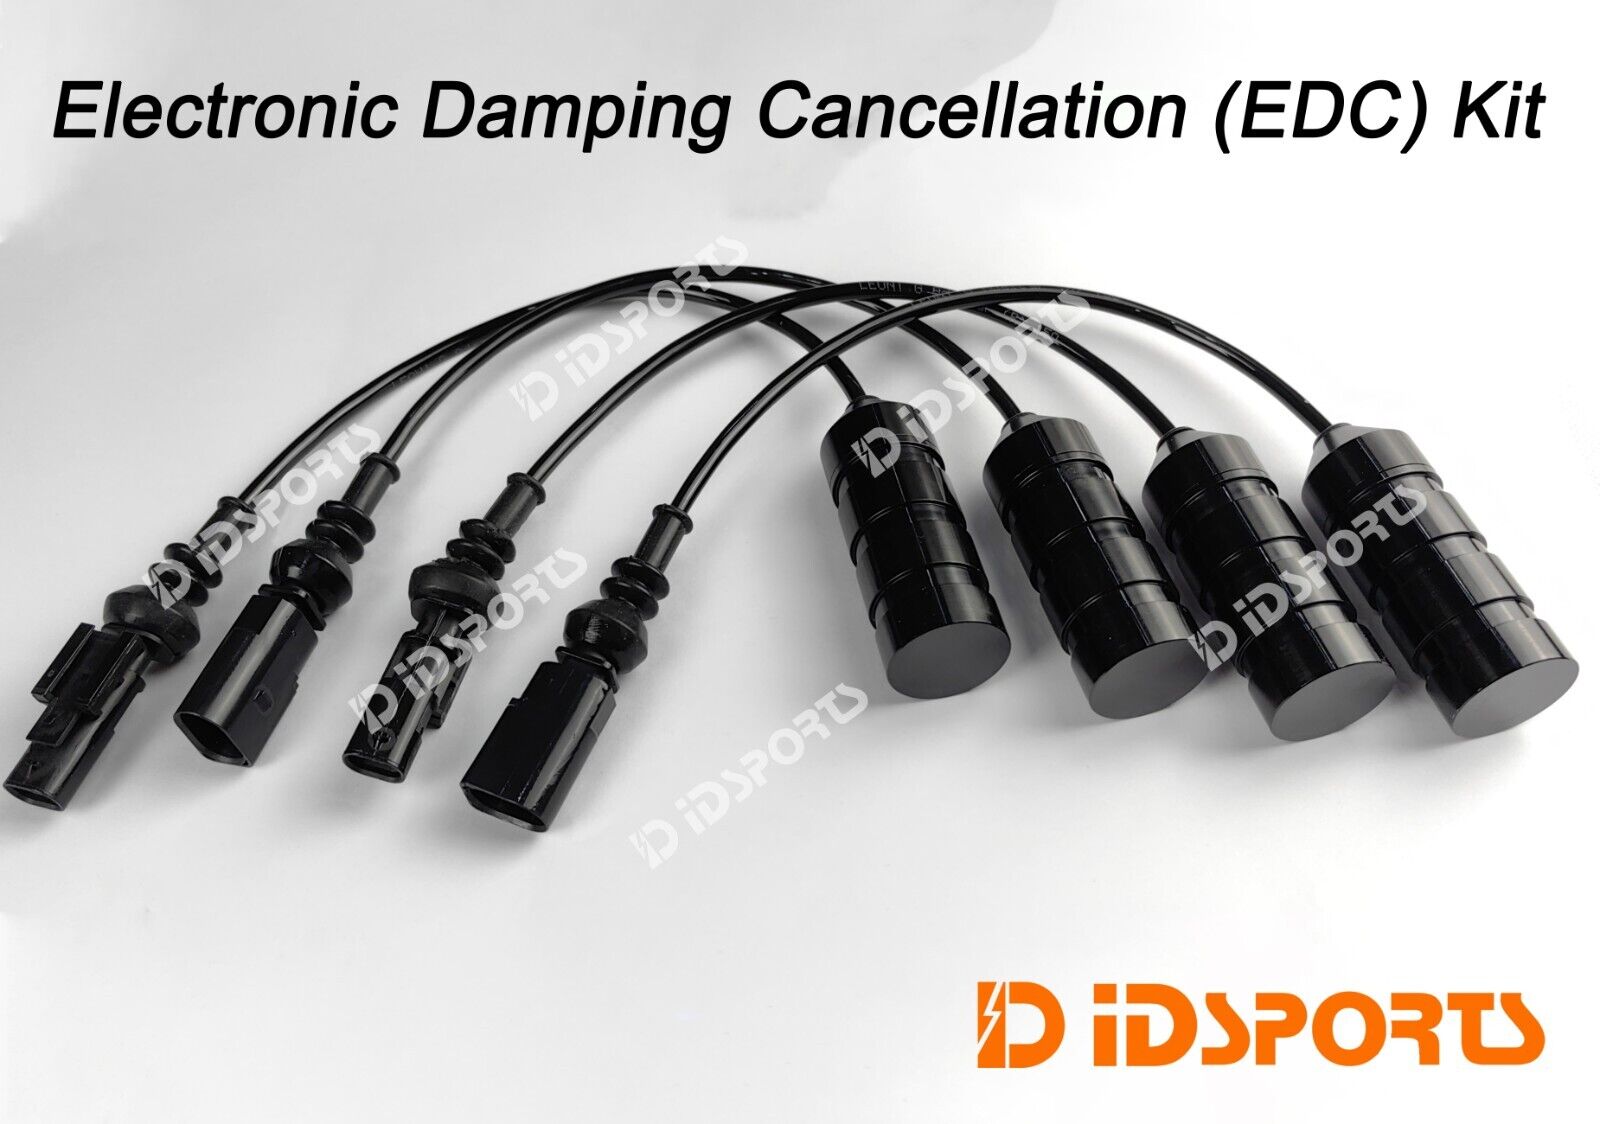 iD Electronic Damping Cancellation Kit for AUDI TTS/TTRS/A4/A5/S4/S5/Q5/RS3